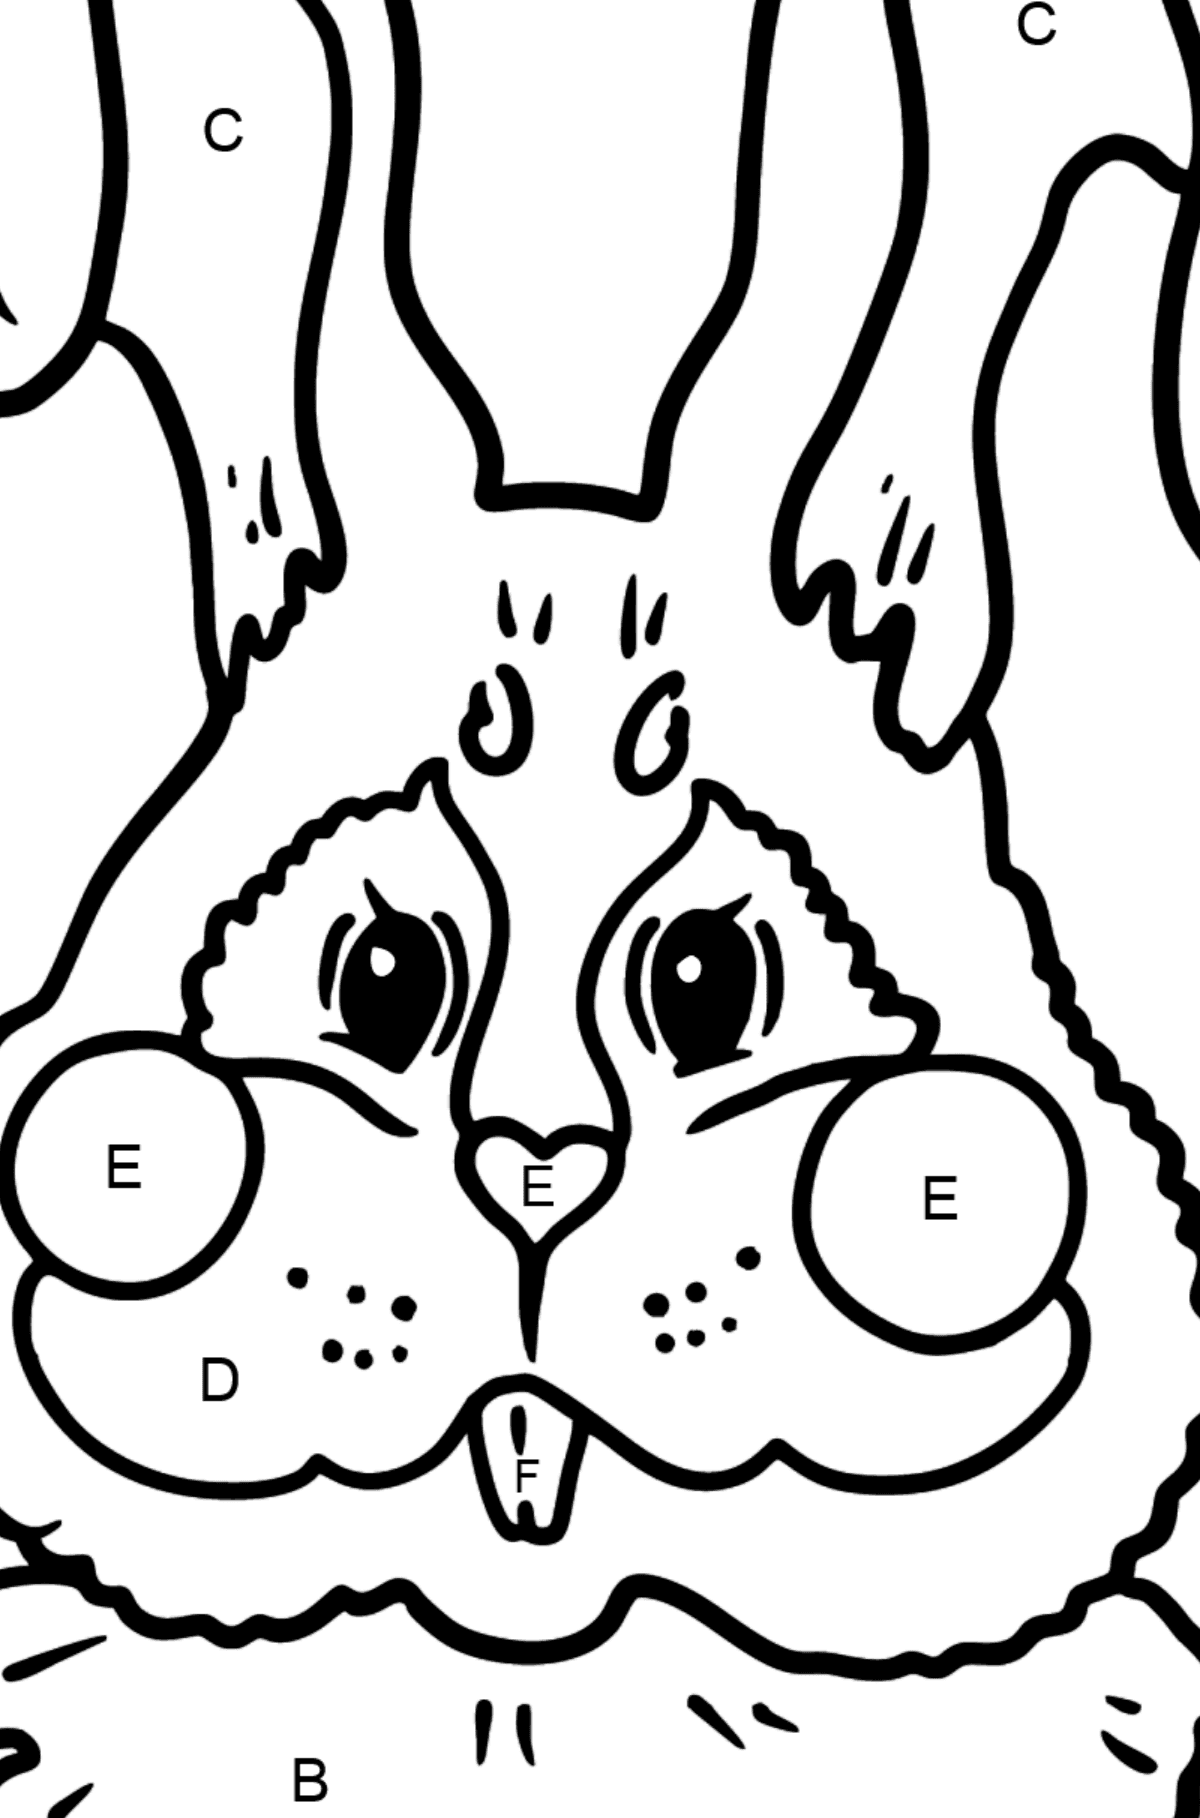 Bunny Face coloring page - Coloring by Letters for Kids